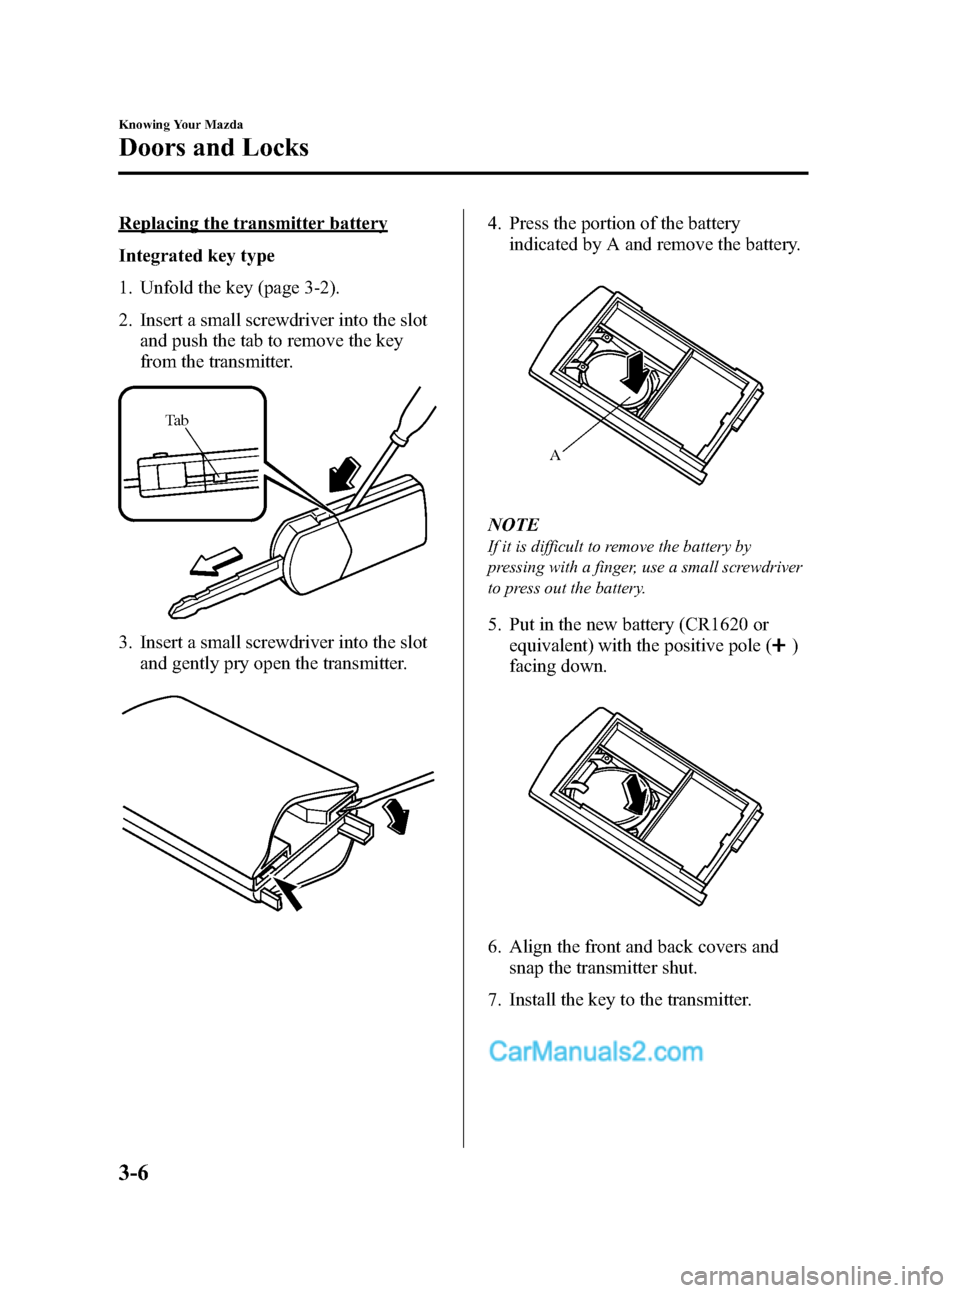 MAZDA MODEL MAZDASPEED 3 2008  Owners Manual (in English) Black plate (78,1)
Replacing the transmitter battery
Integrated key type
1. Unfold the key (page 3-2).
2. Insert a small screwdriver into the slot
and push the tab to remove the key
from the transmitt